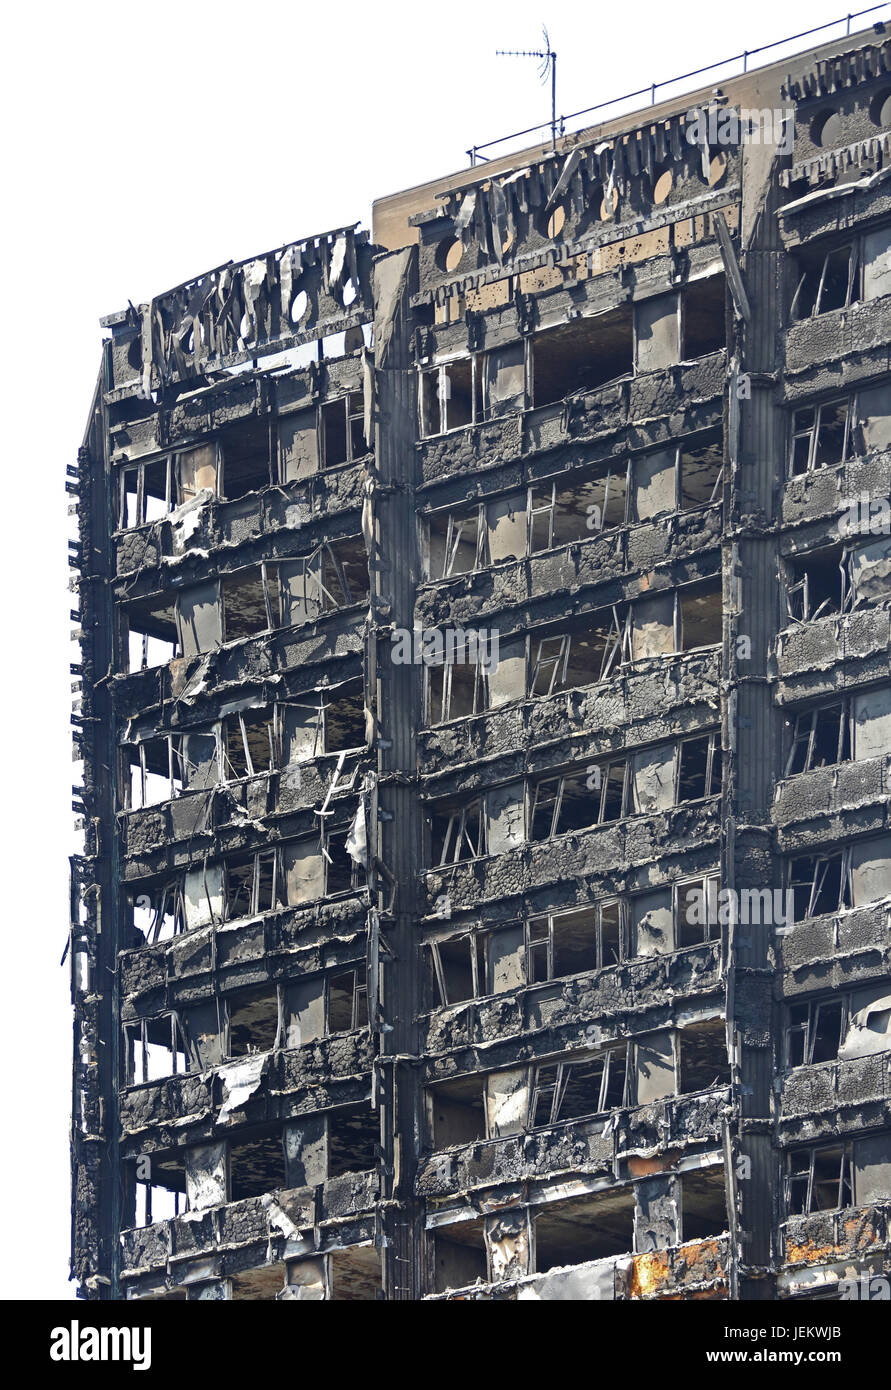 Close-up of the burnt-out shell of Grenfell House, London, UK. The 23 storey residential block was destroyed by fire, June 2017. At least 79 dead. Stock Photo